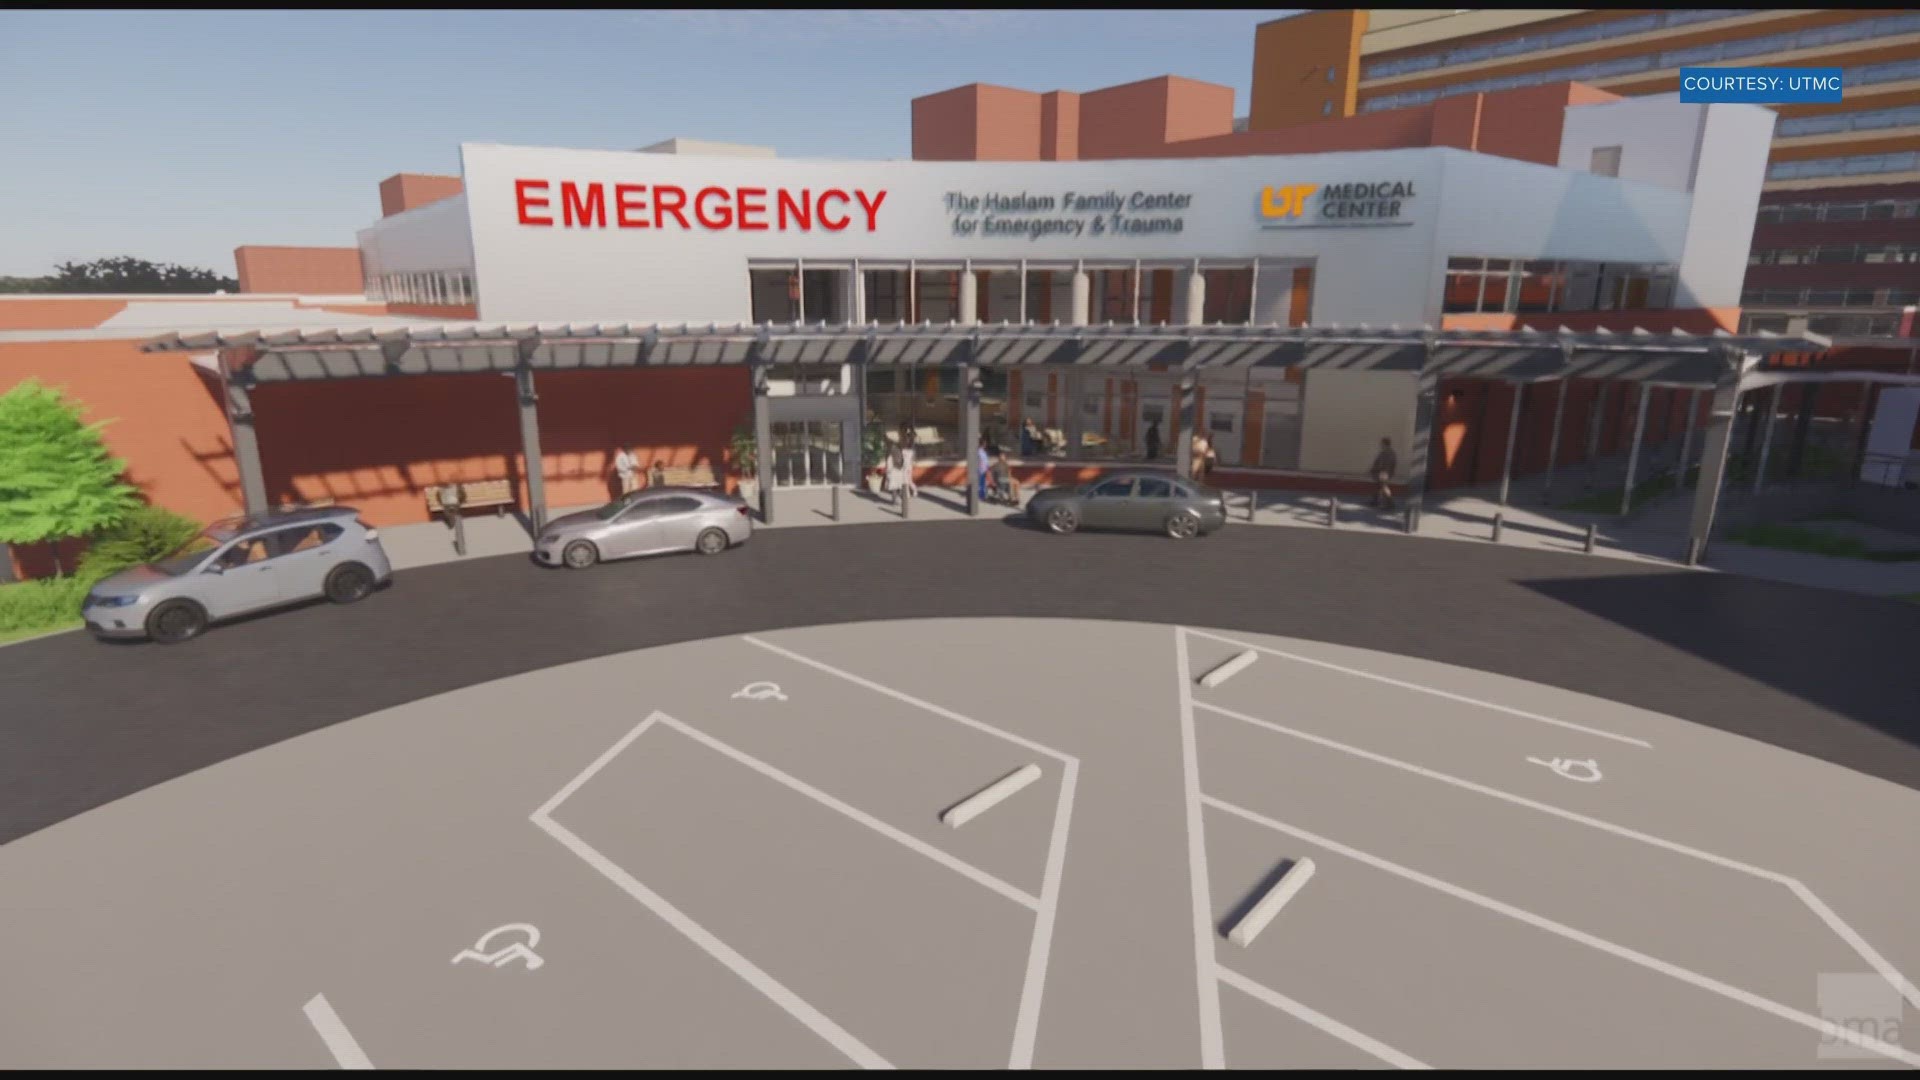 The expanded department will be renamed The Haslam Family Center Emergency & Trauma Services in recognition of the support of the Haslam family, UTMC said.